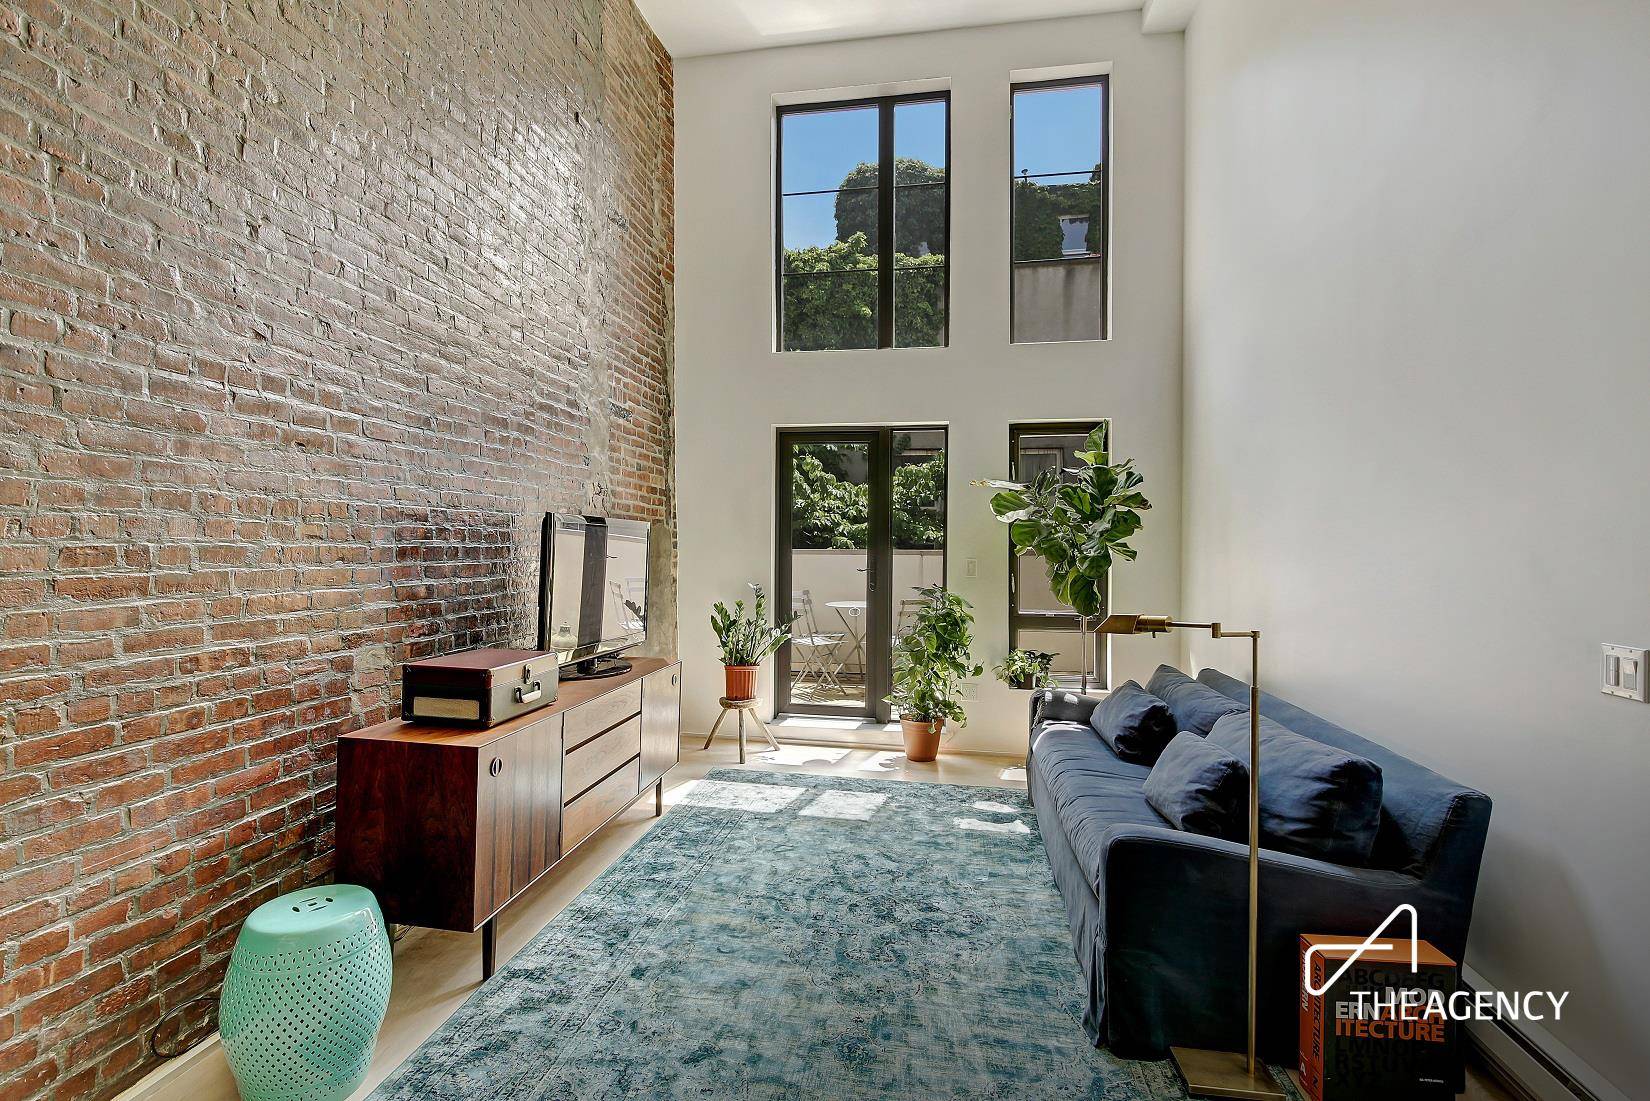 Welcome home to an incredible duplex loft apartment with a private TERRACE in south Williamsburg.